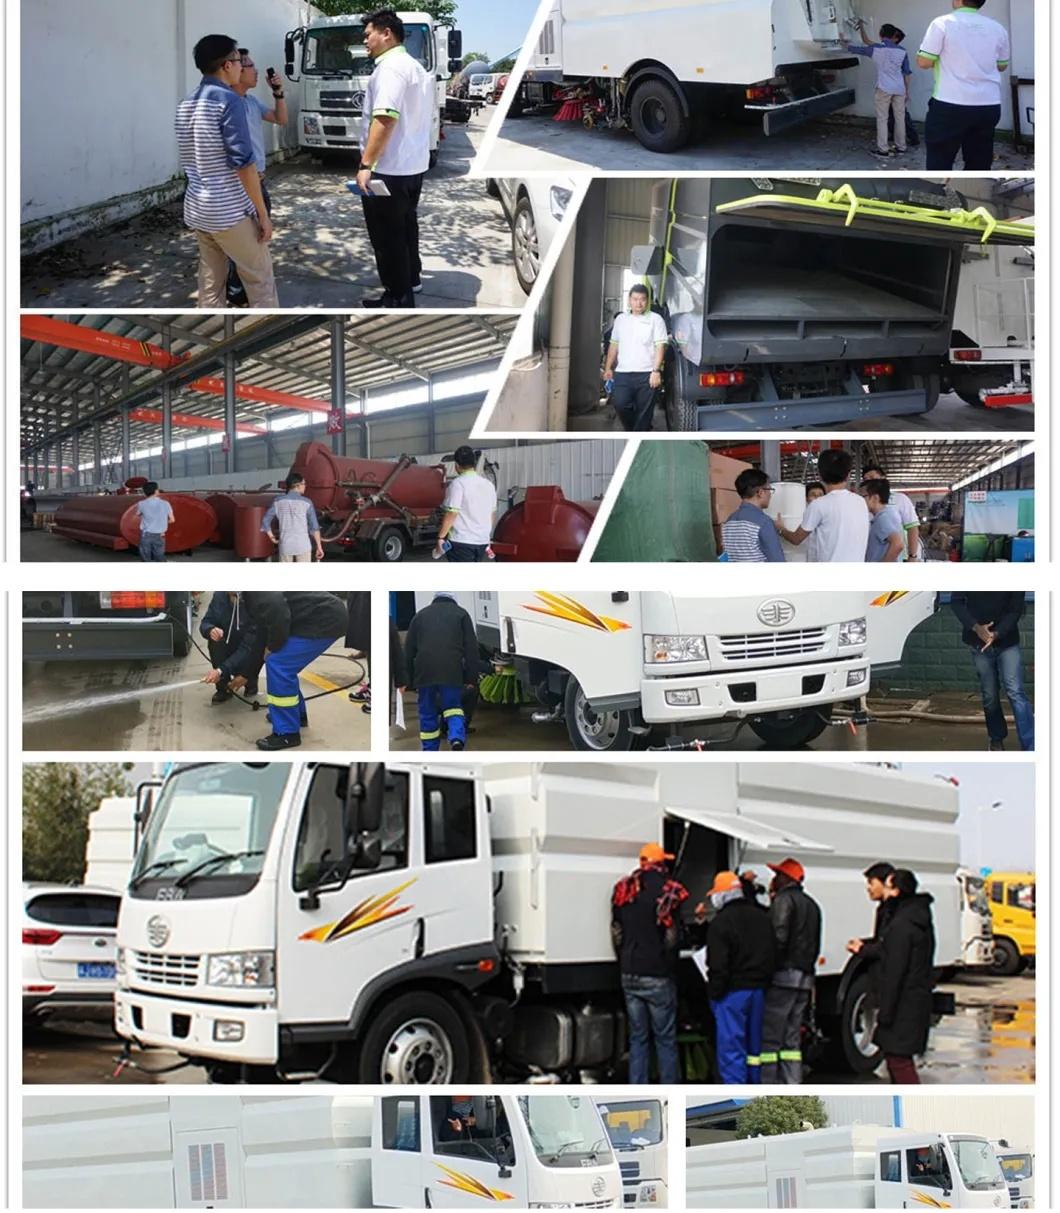 Dongfeng Washing Street Vehicle Road Cleaning Dust Vacuum Sweeper Truck